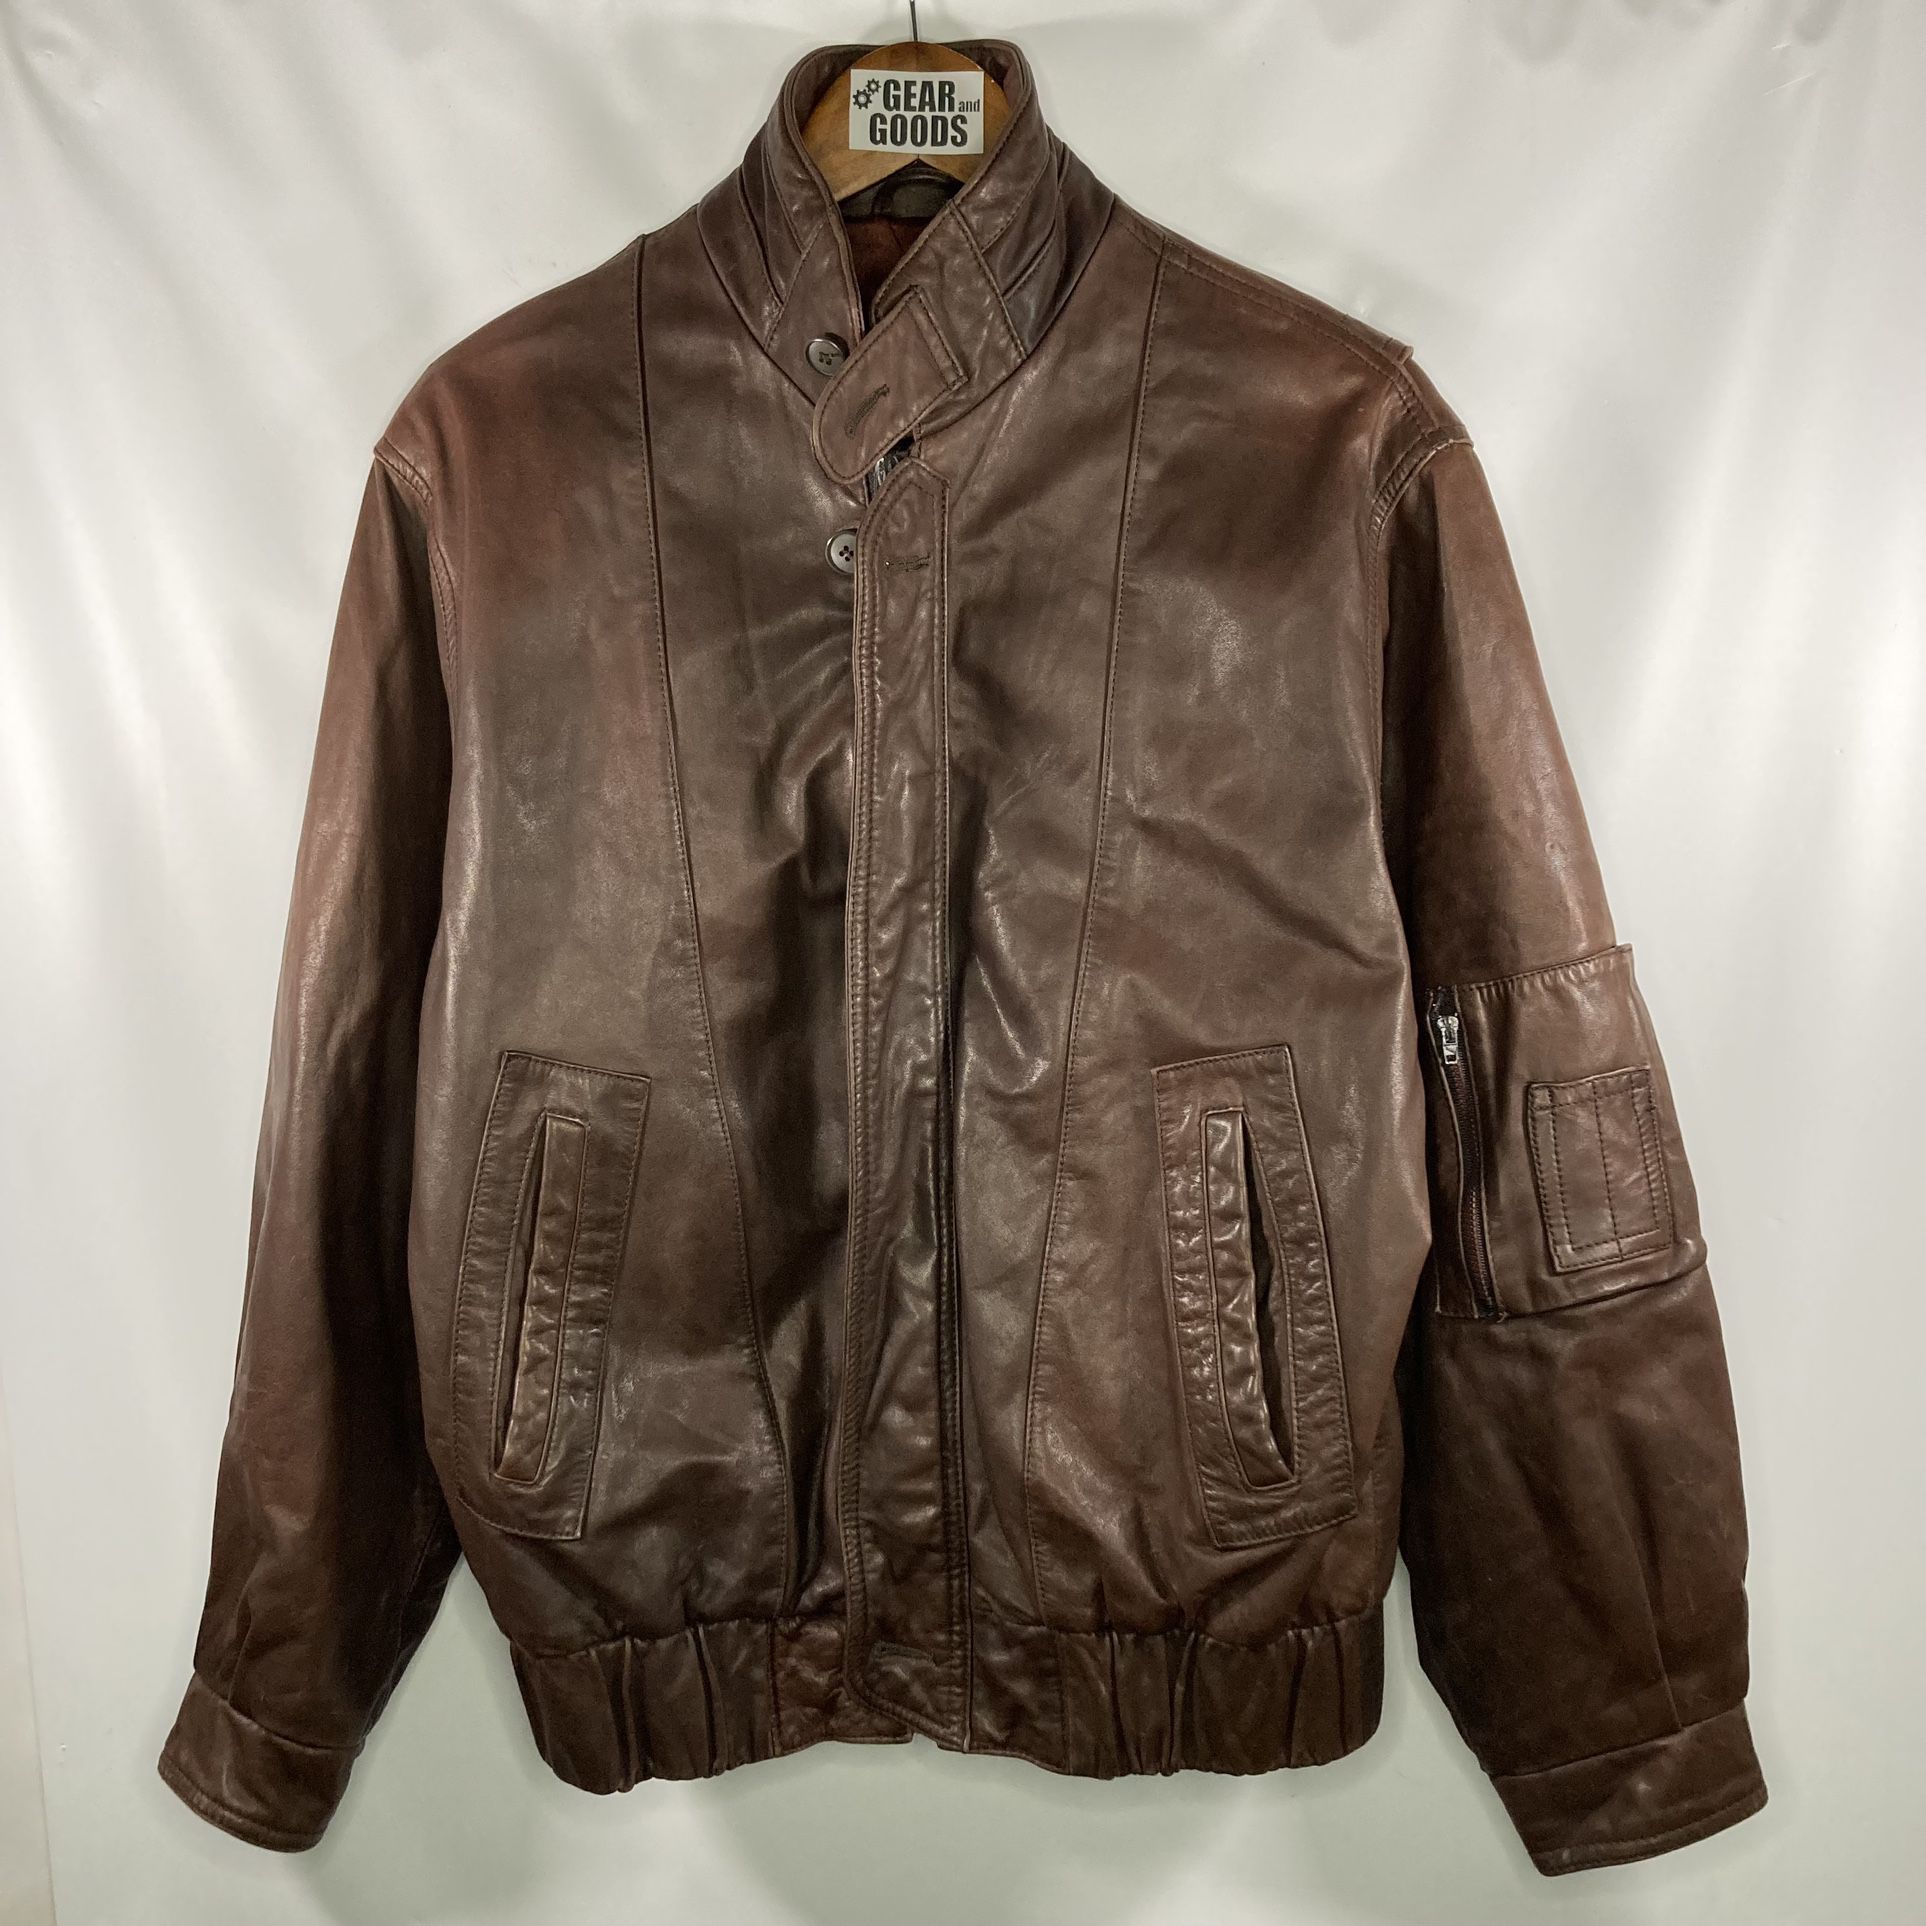  Towne by LONDON FOG Genuine Brown Leather Jacket Motorcycle Men's Small